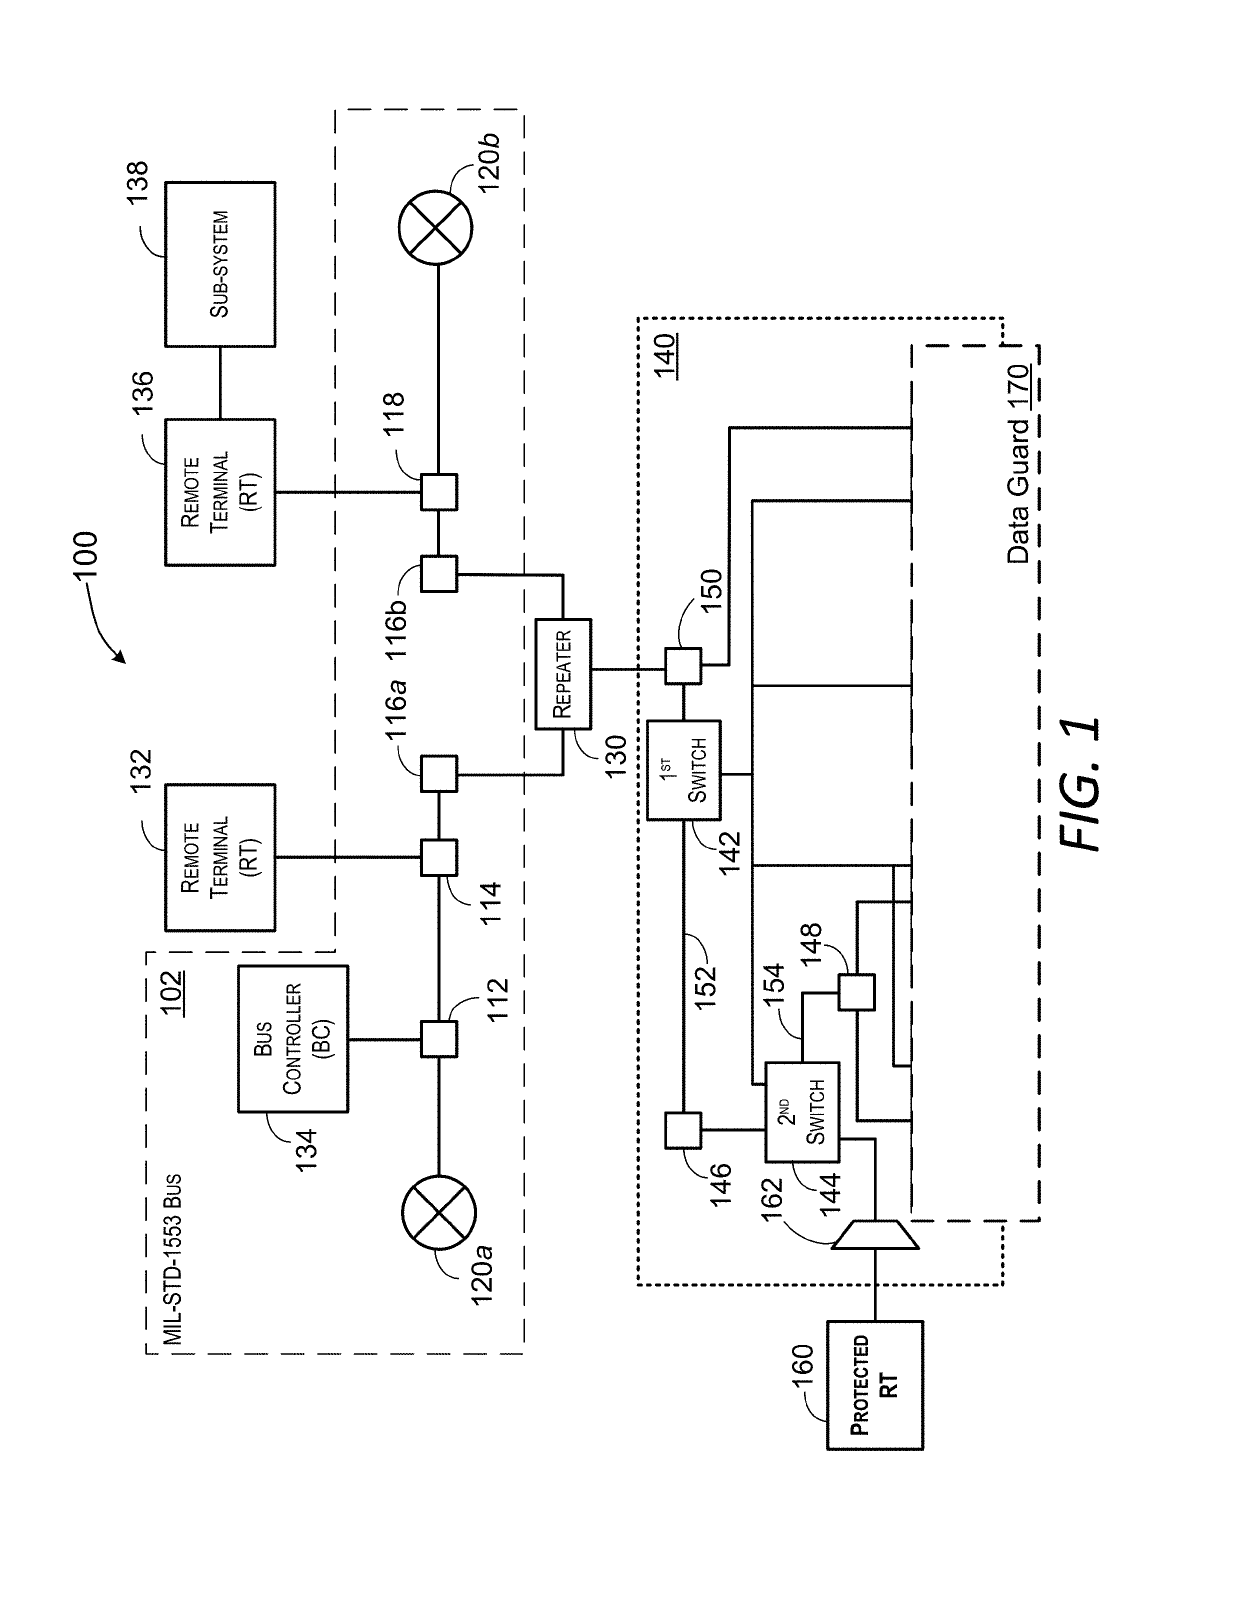 System and method of monitoring data traffic on a MIL-STD-1553 data bus